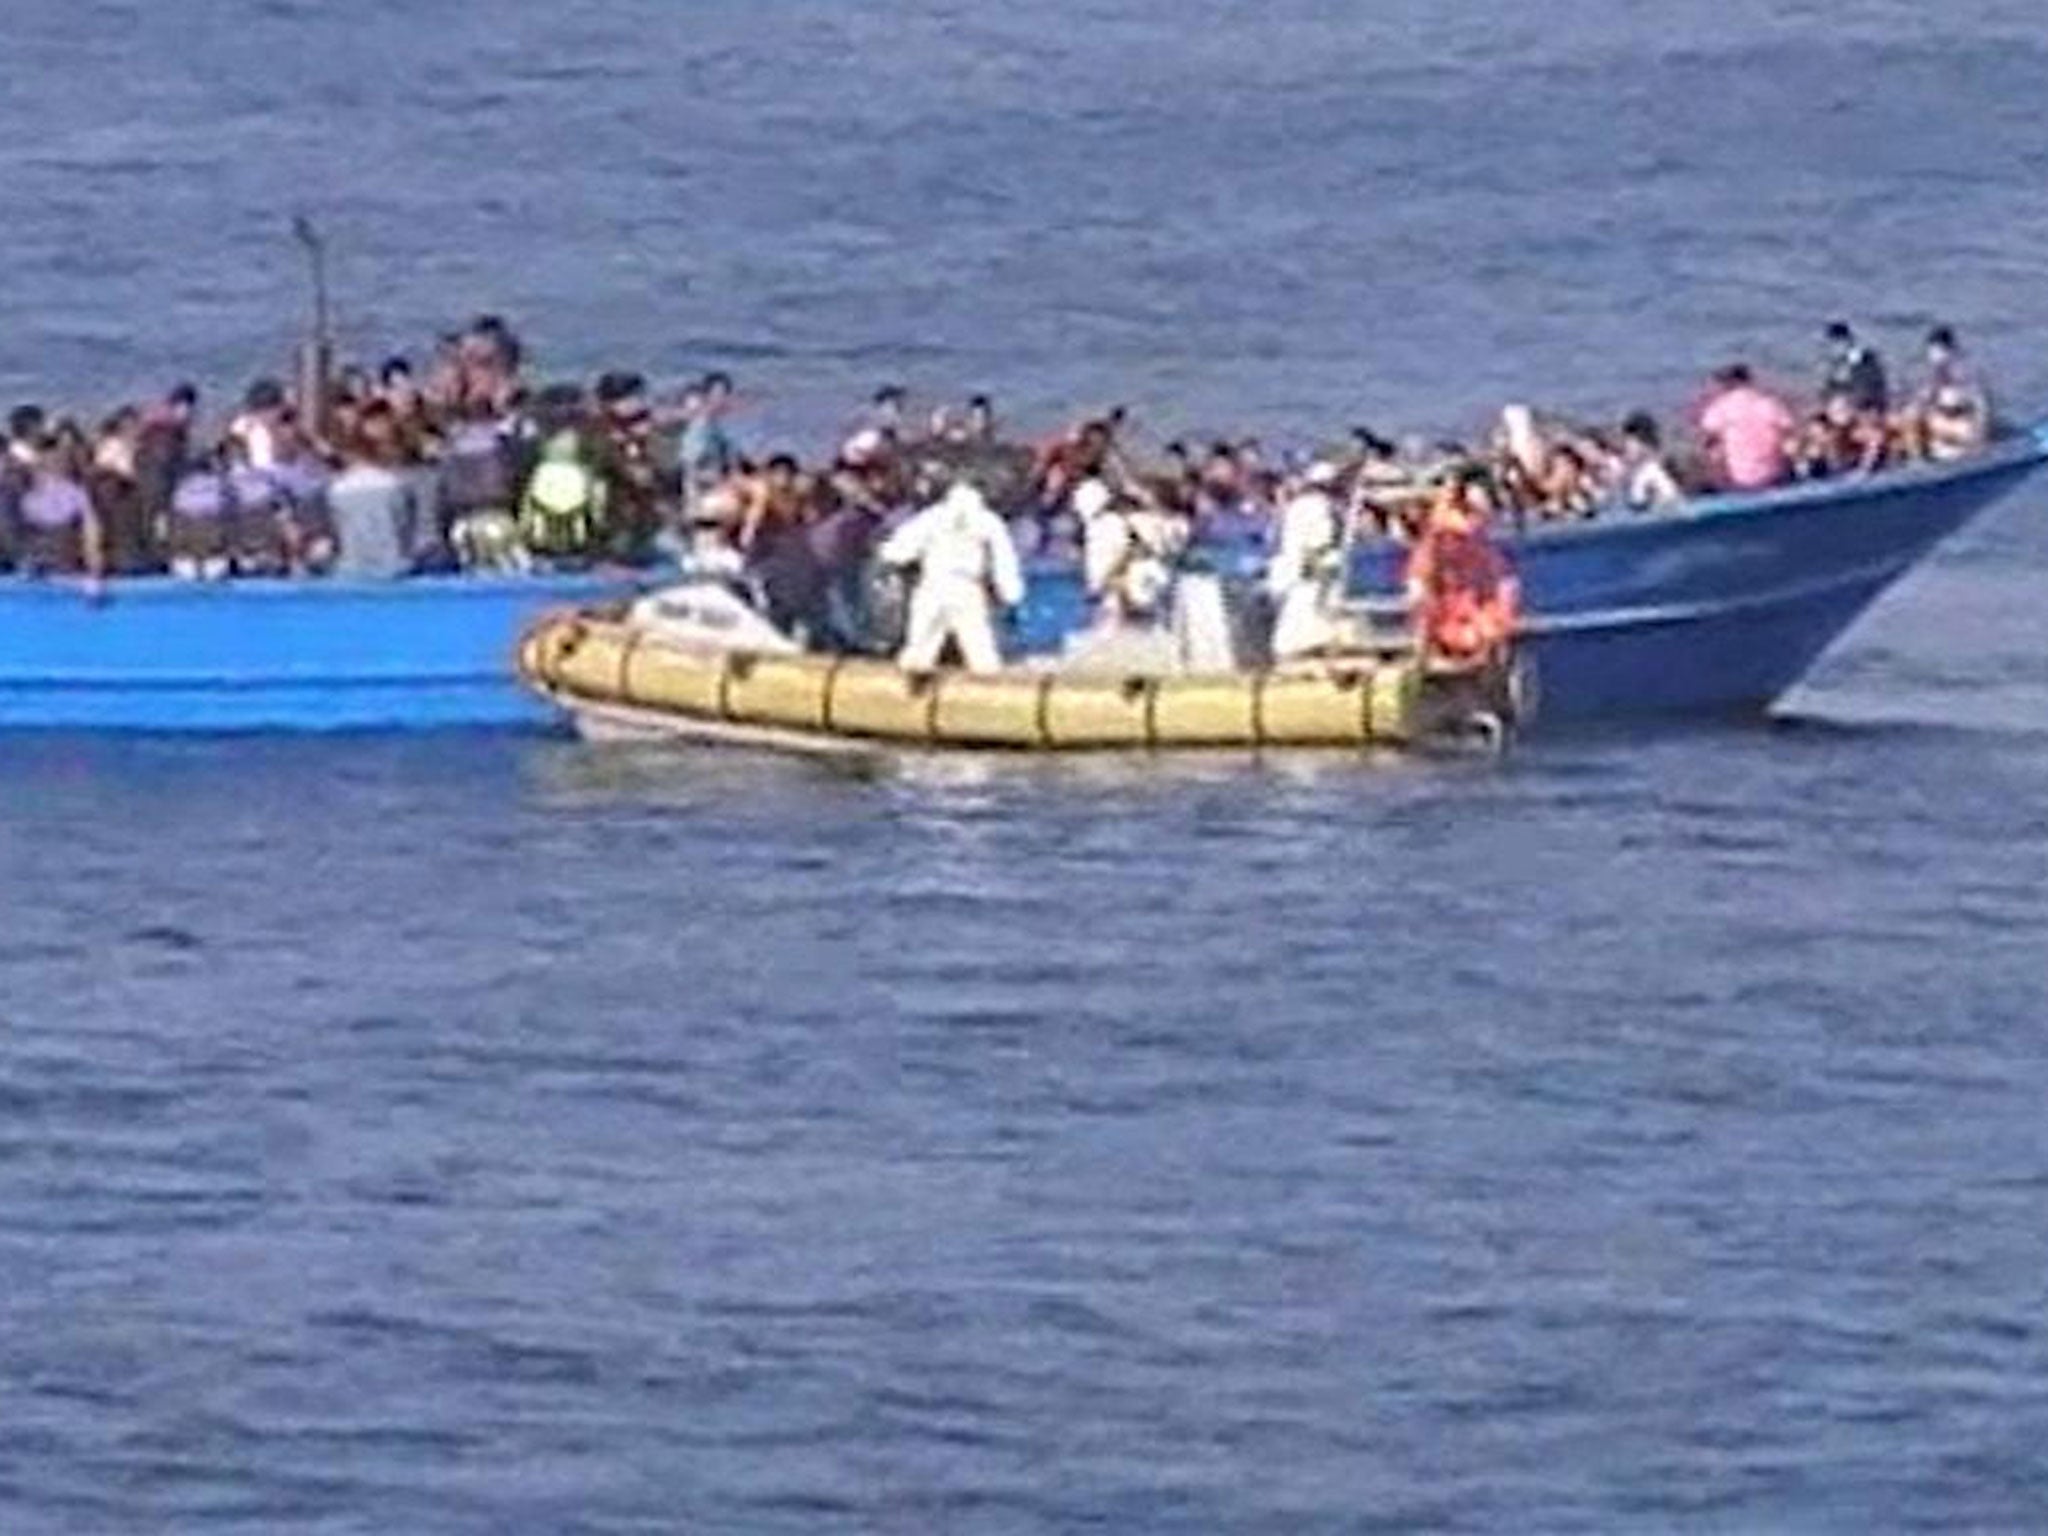 Passengers rescued by the Italian navy included women and children